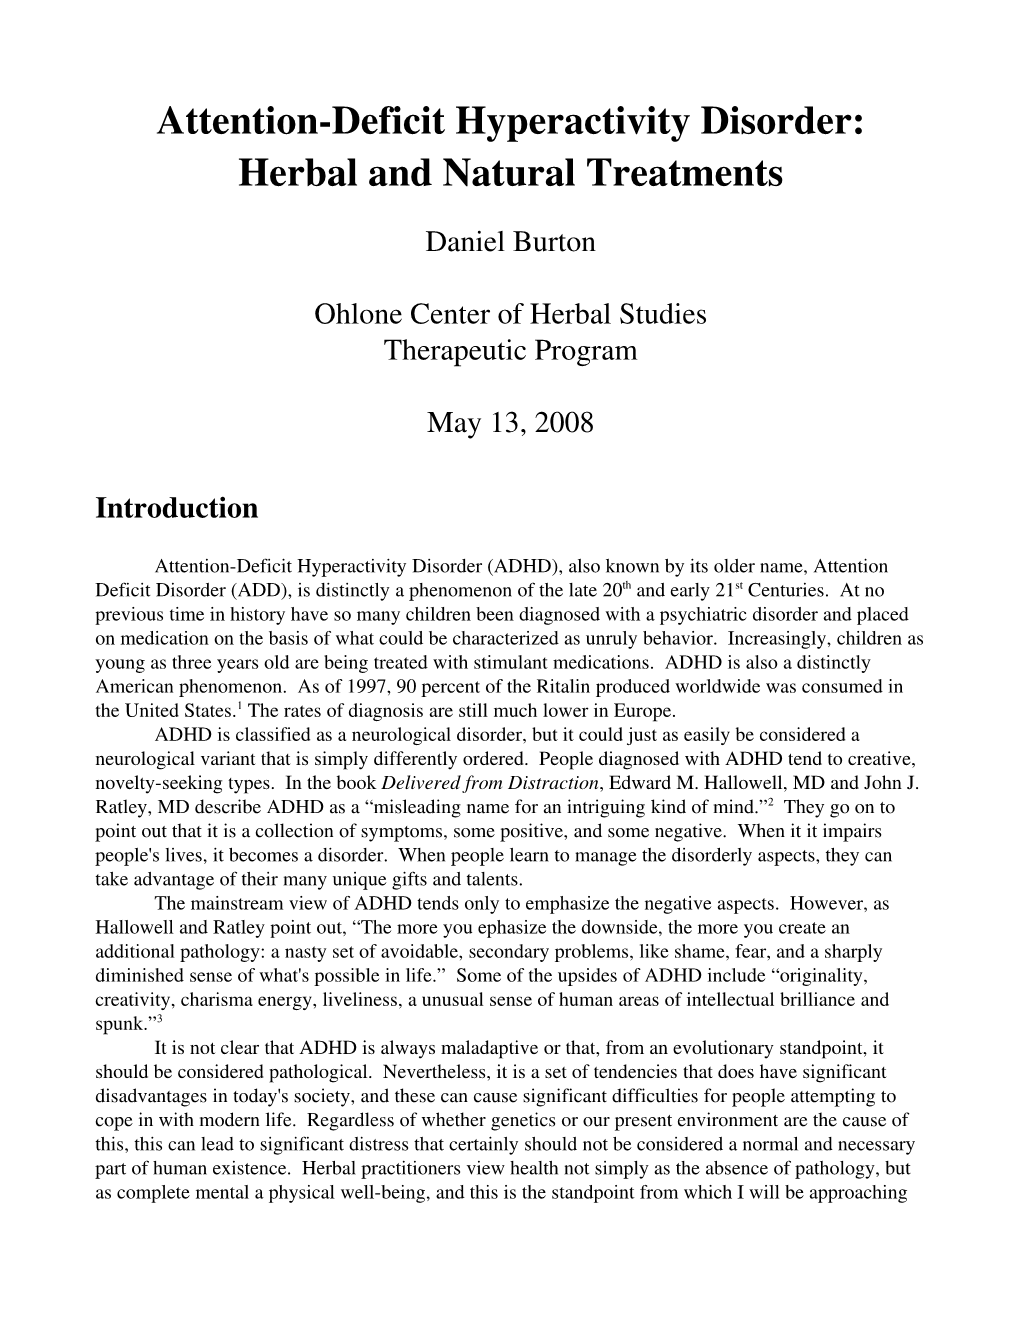 Attention Deficit Hyperactivity Disorder: Herbal and Natural Treatments